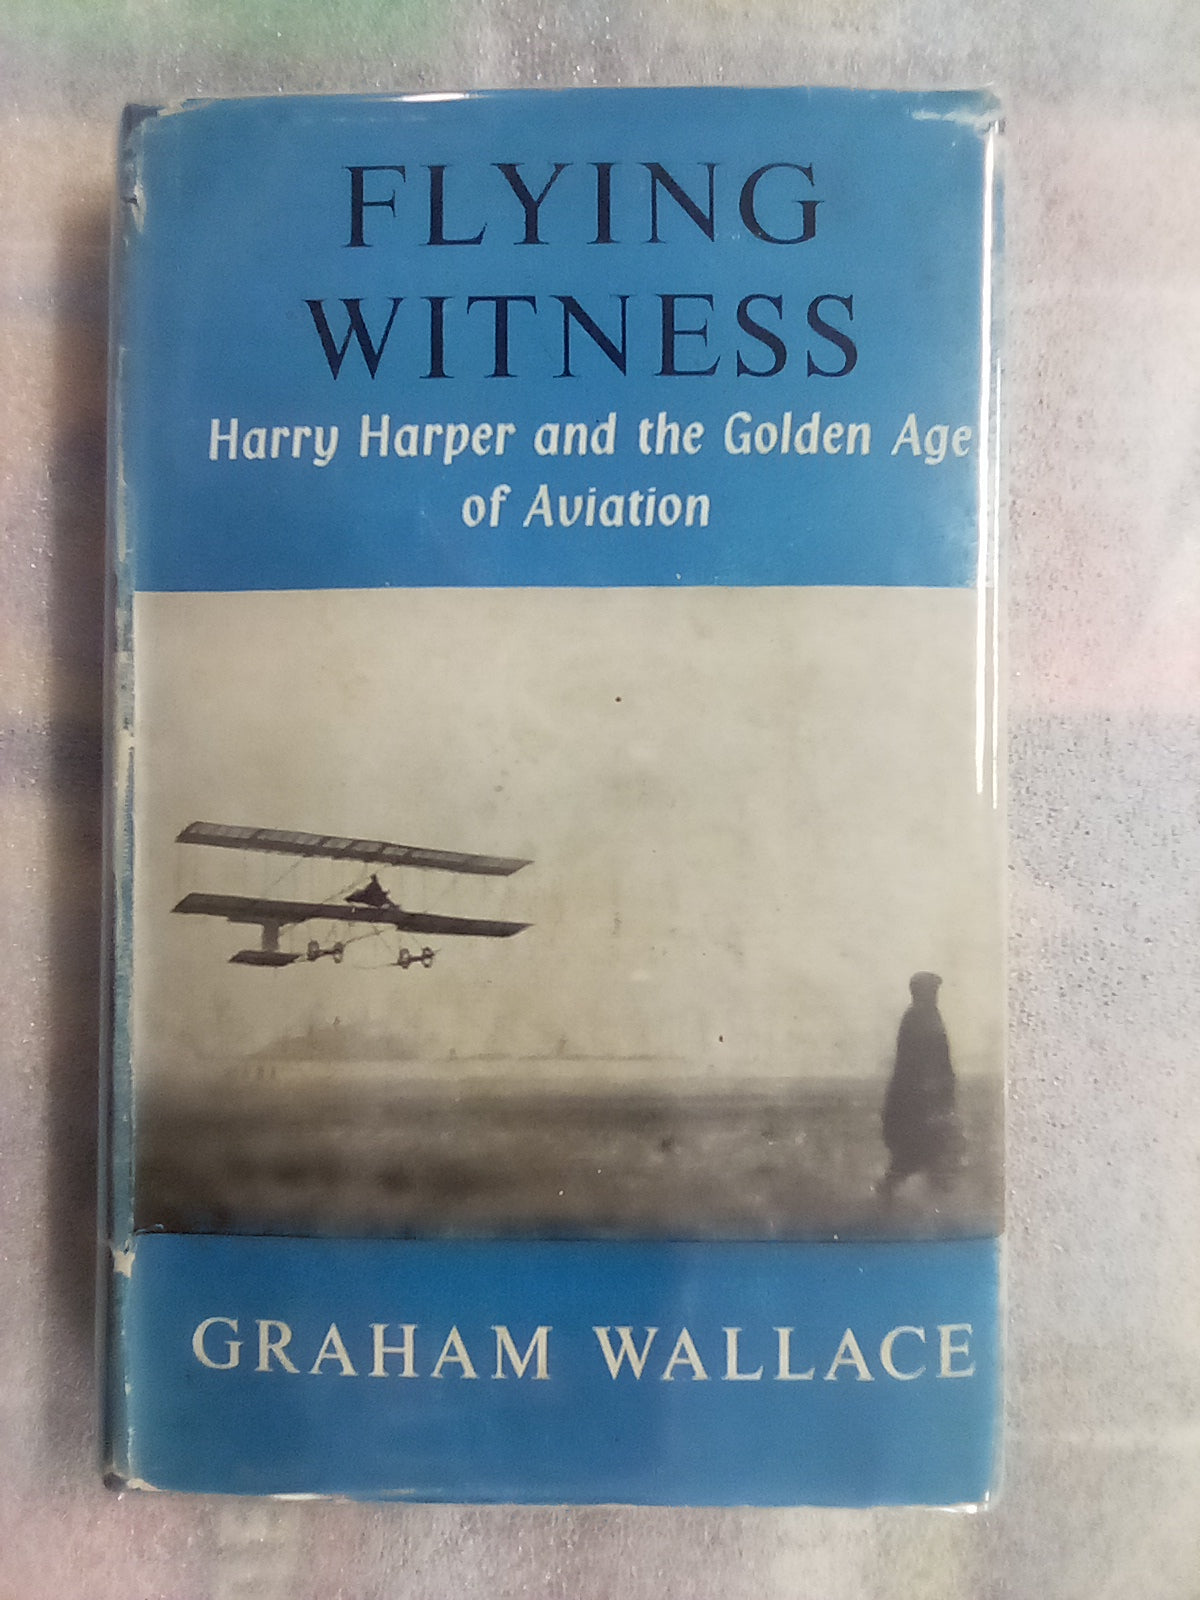 Flying Witness - Harry Harper and the Golden Age of Aviation